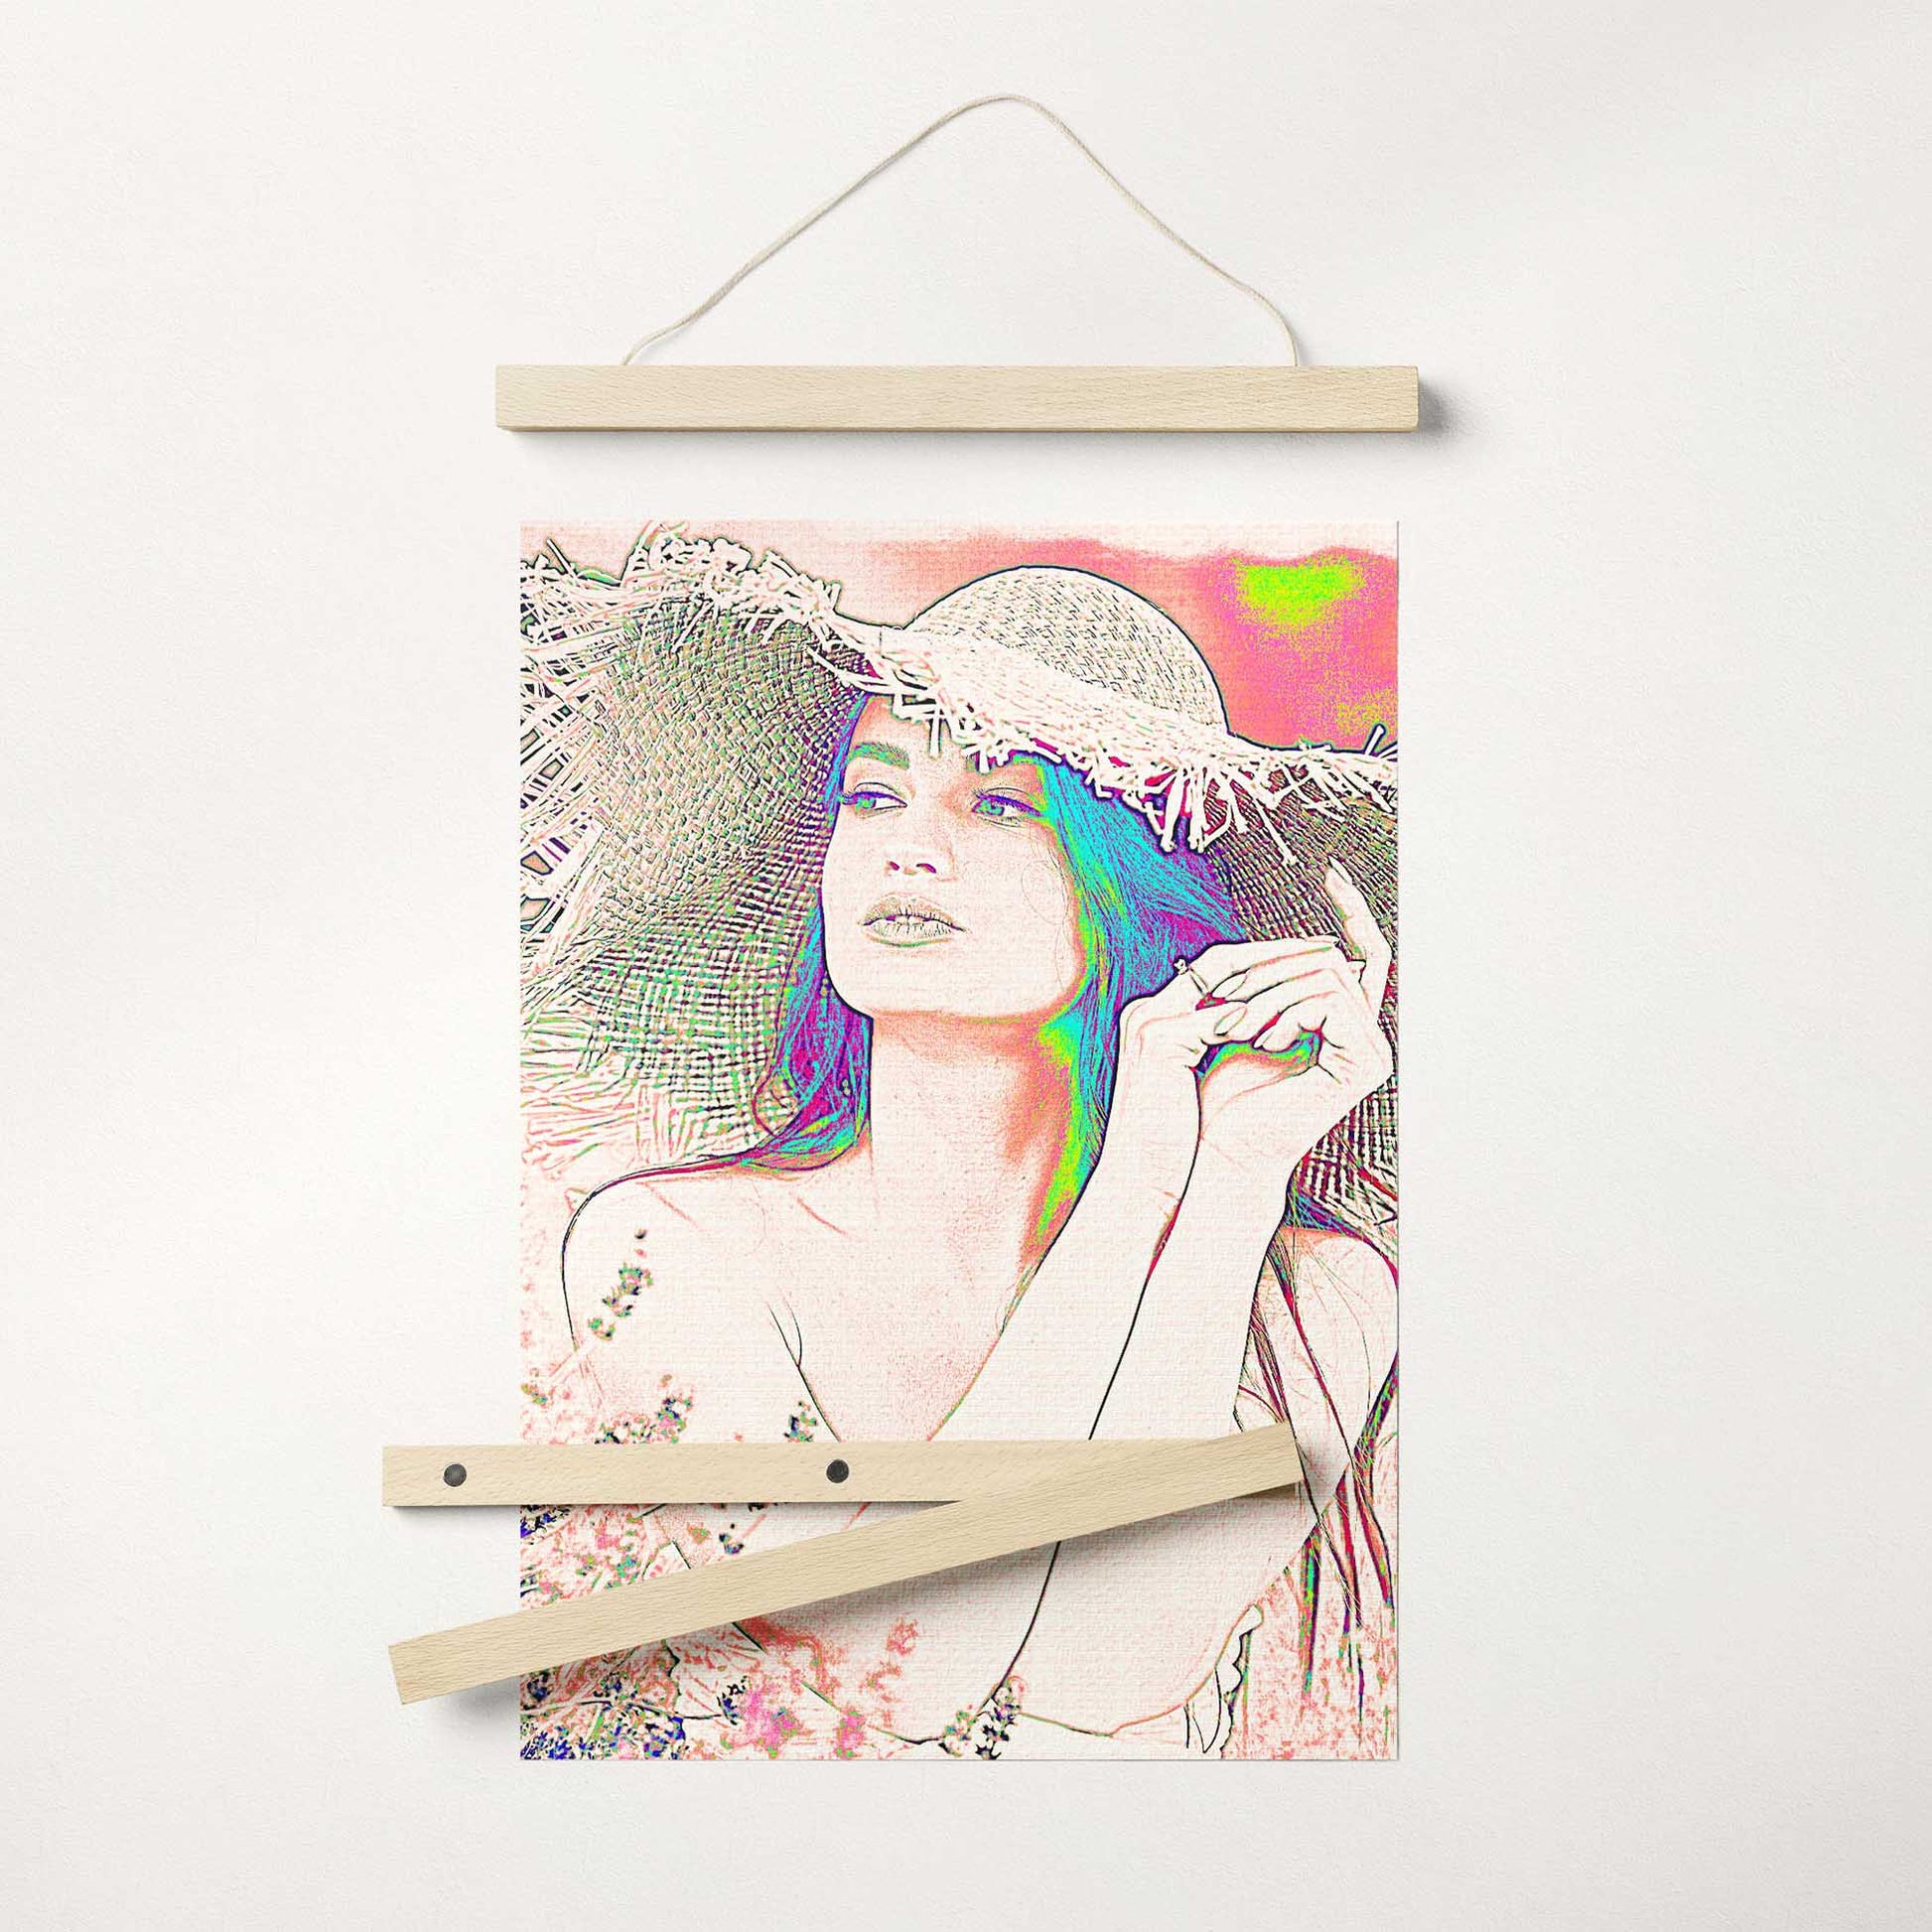 The Personalised Pencil Drawing Poster Hanger is a captivating and elegant addition to your home decor. Its pencil effect transforms any photo into a minimalist and vibrant work of art. Crafted with a real wooden magnetic frame and printed 